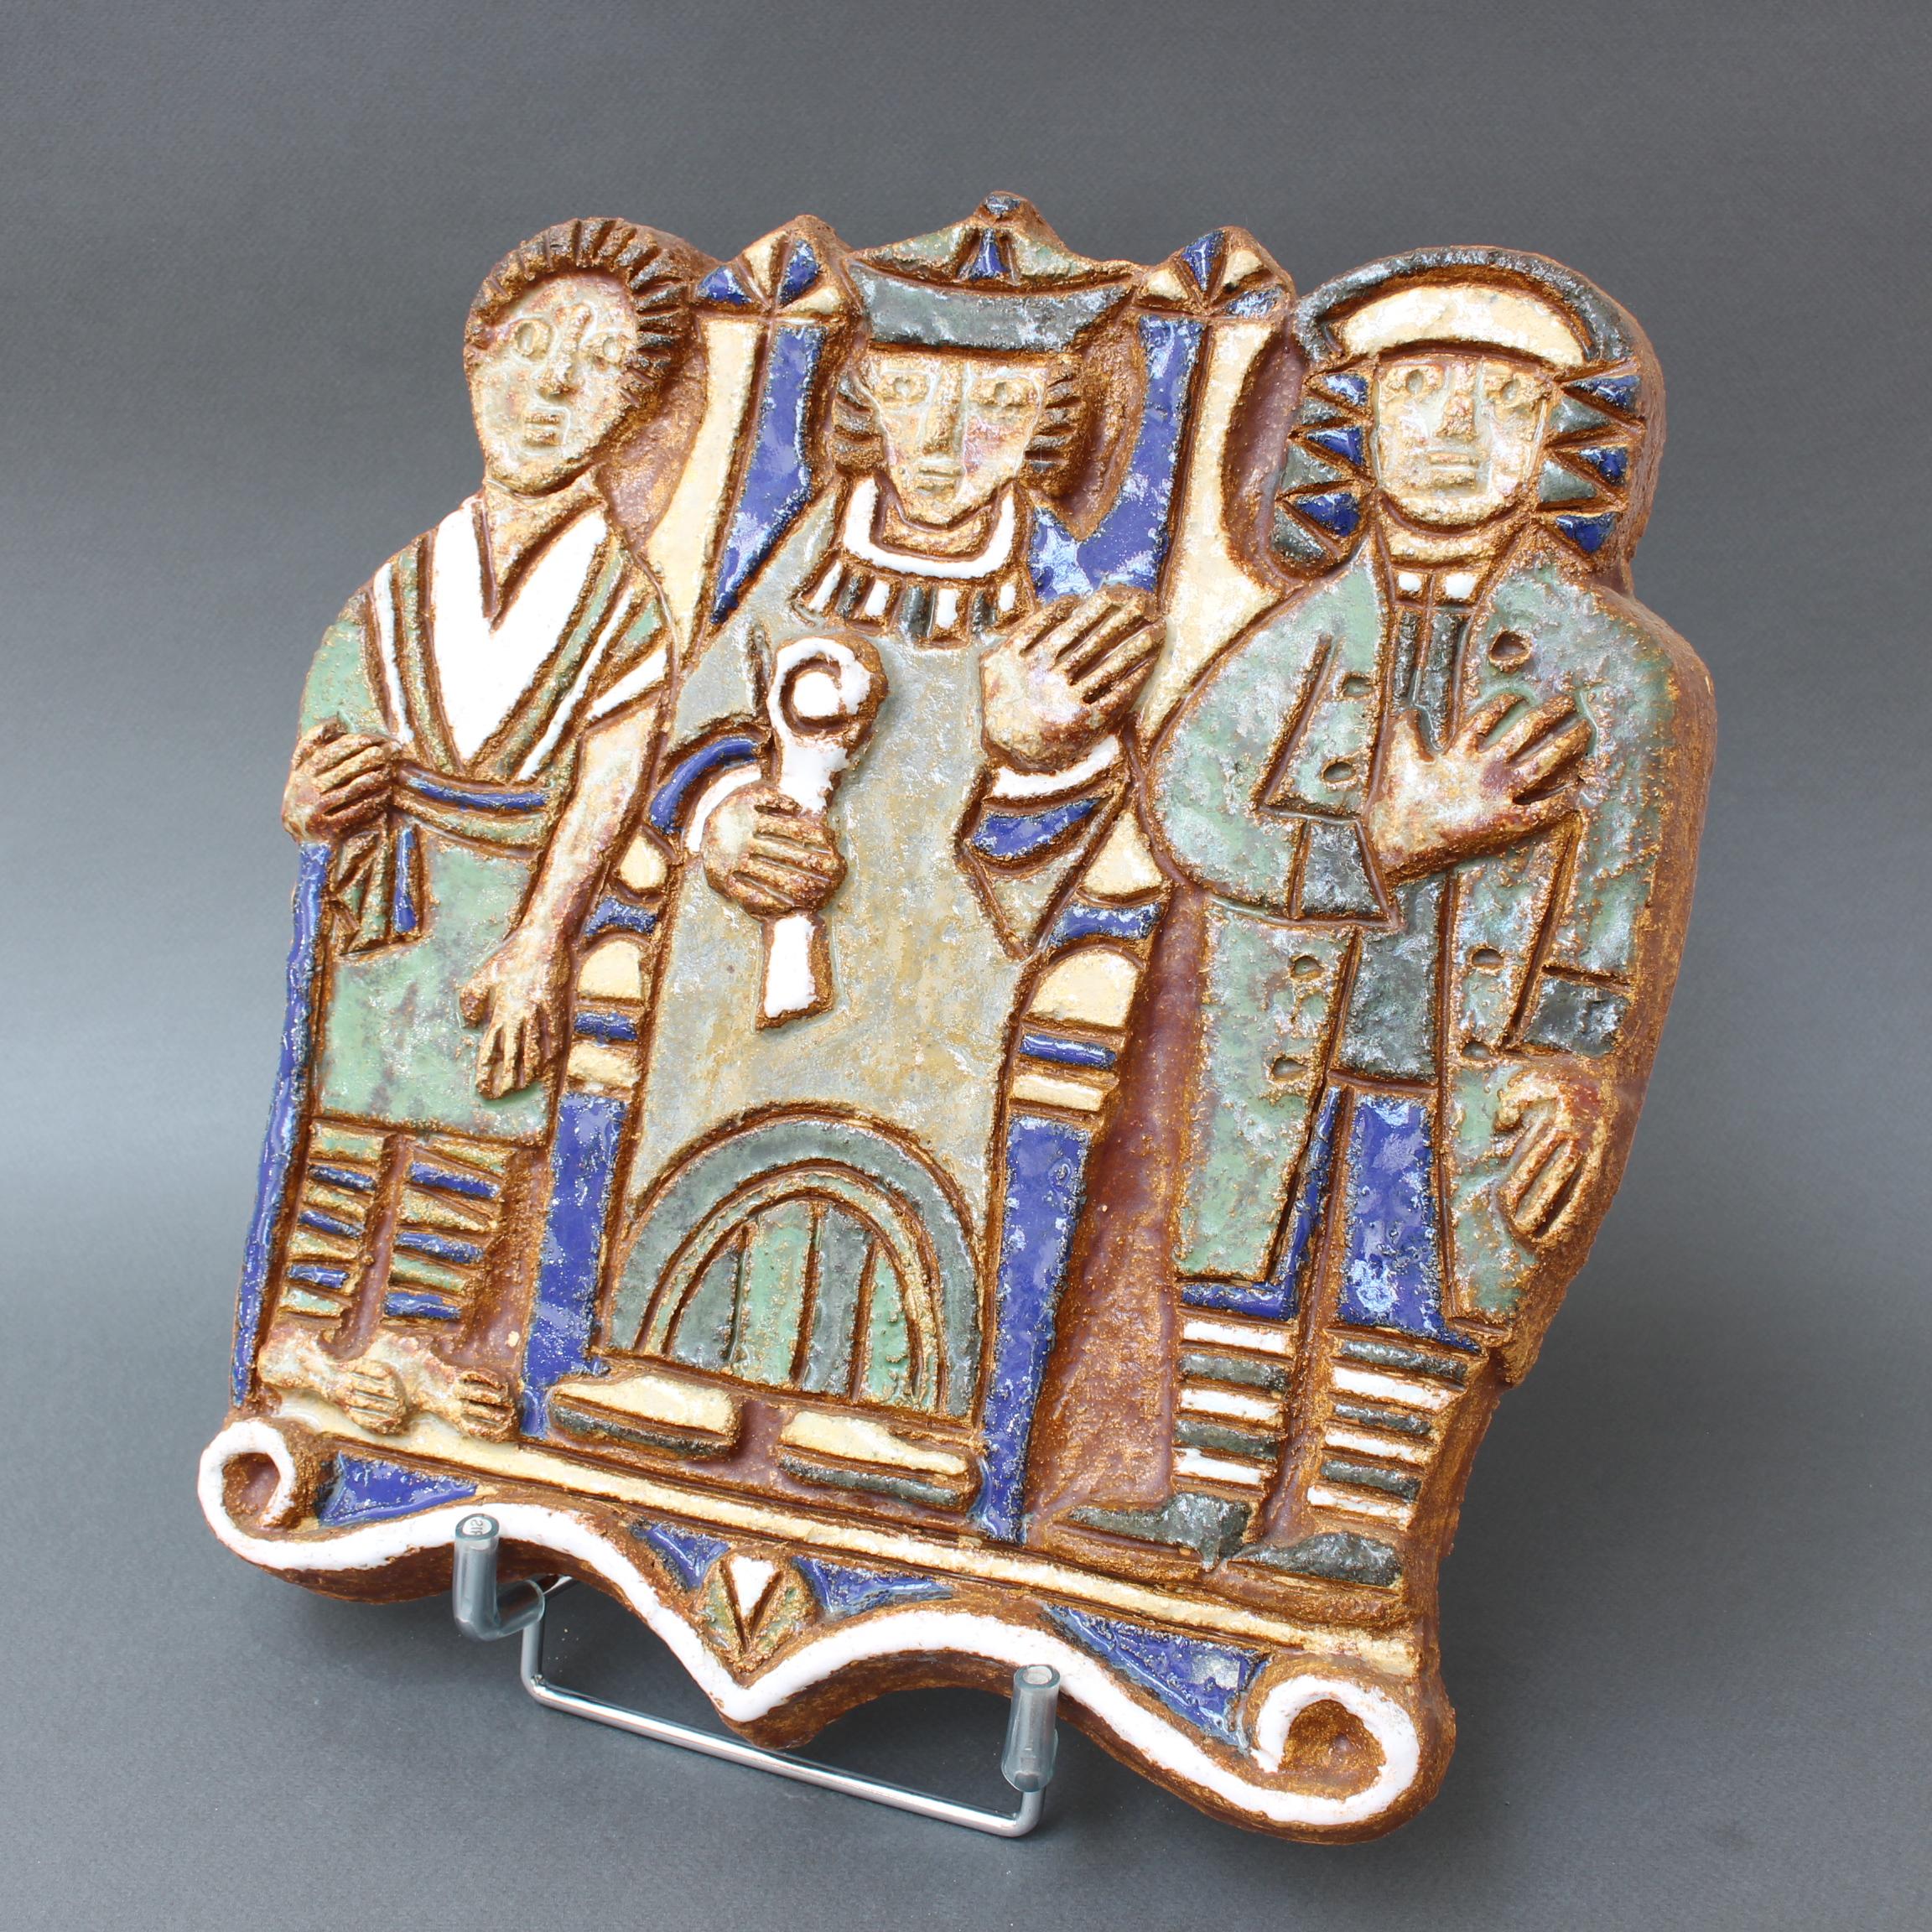 French vintage decorative ceramic wall plaque with three figures, by Les Argonautes, Vallauris, France (circa 1960s). A refreshingly naive and charming piece depicting three men in olden robes and hats. It is up to the viewer to decide who they